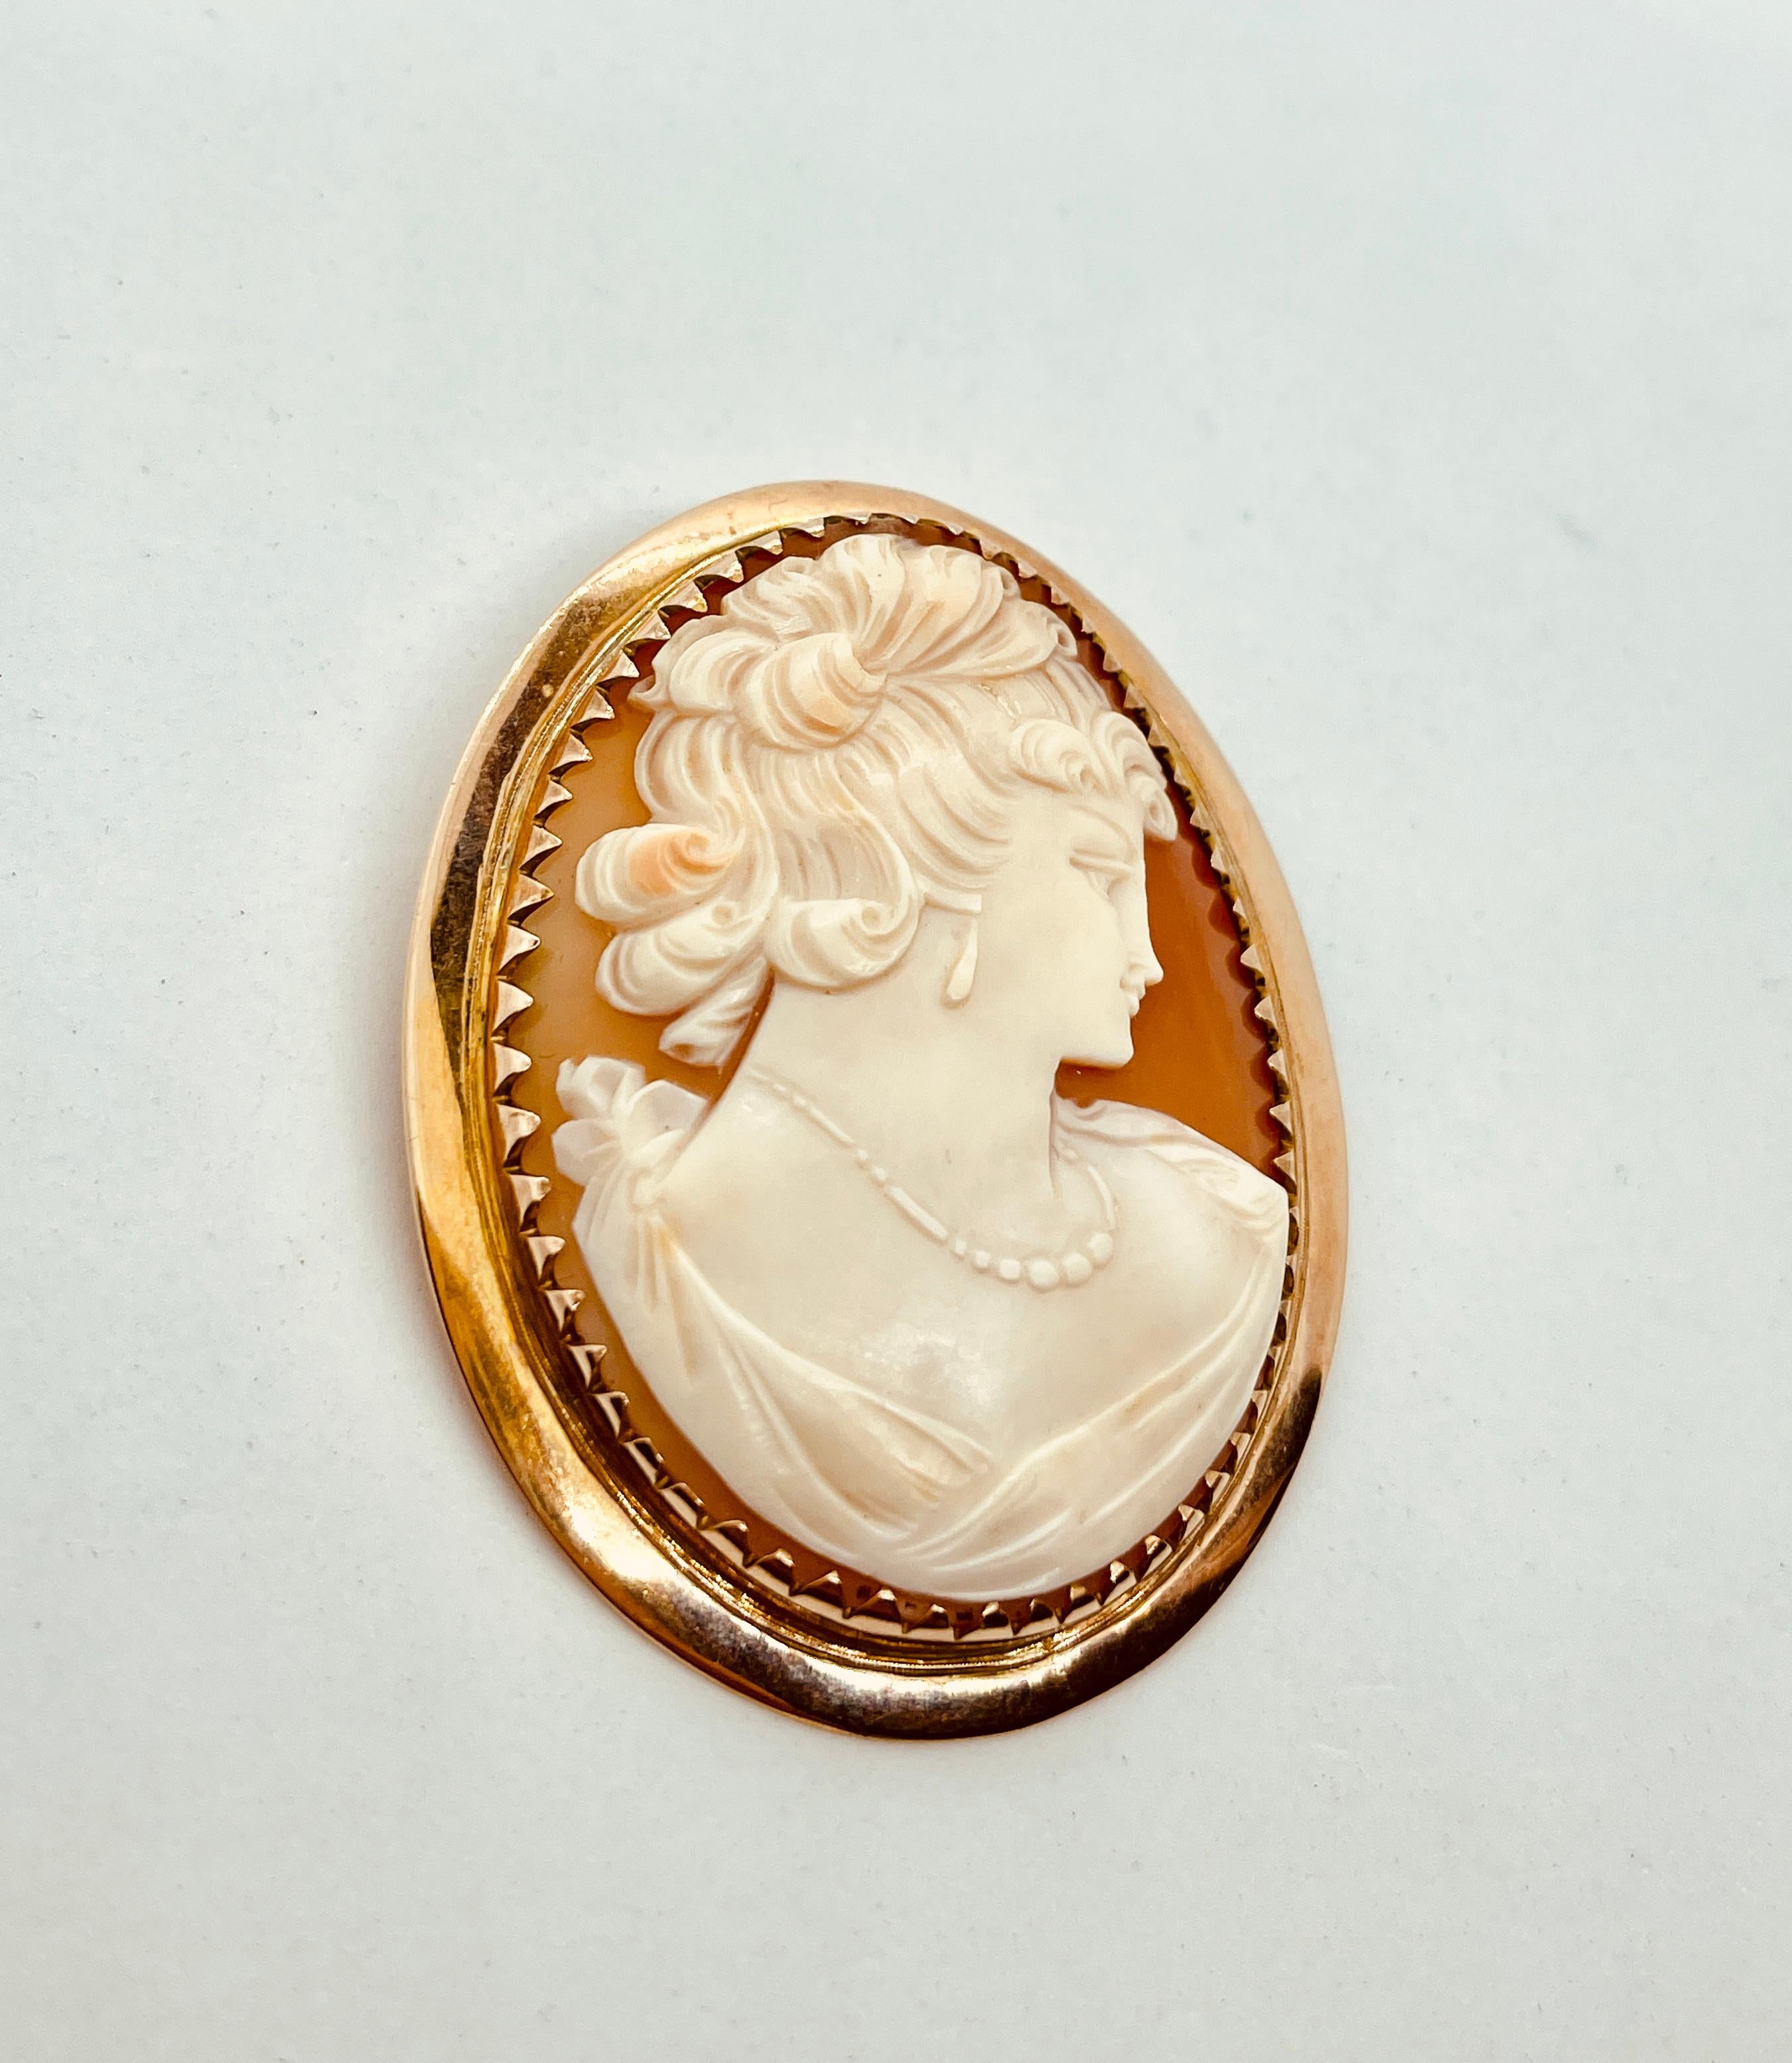 Vintage 9ct Gold Cameo Brooch NeoClassical Lady Wearing Earrings Necklace c1940s For Sale 2